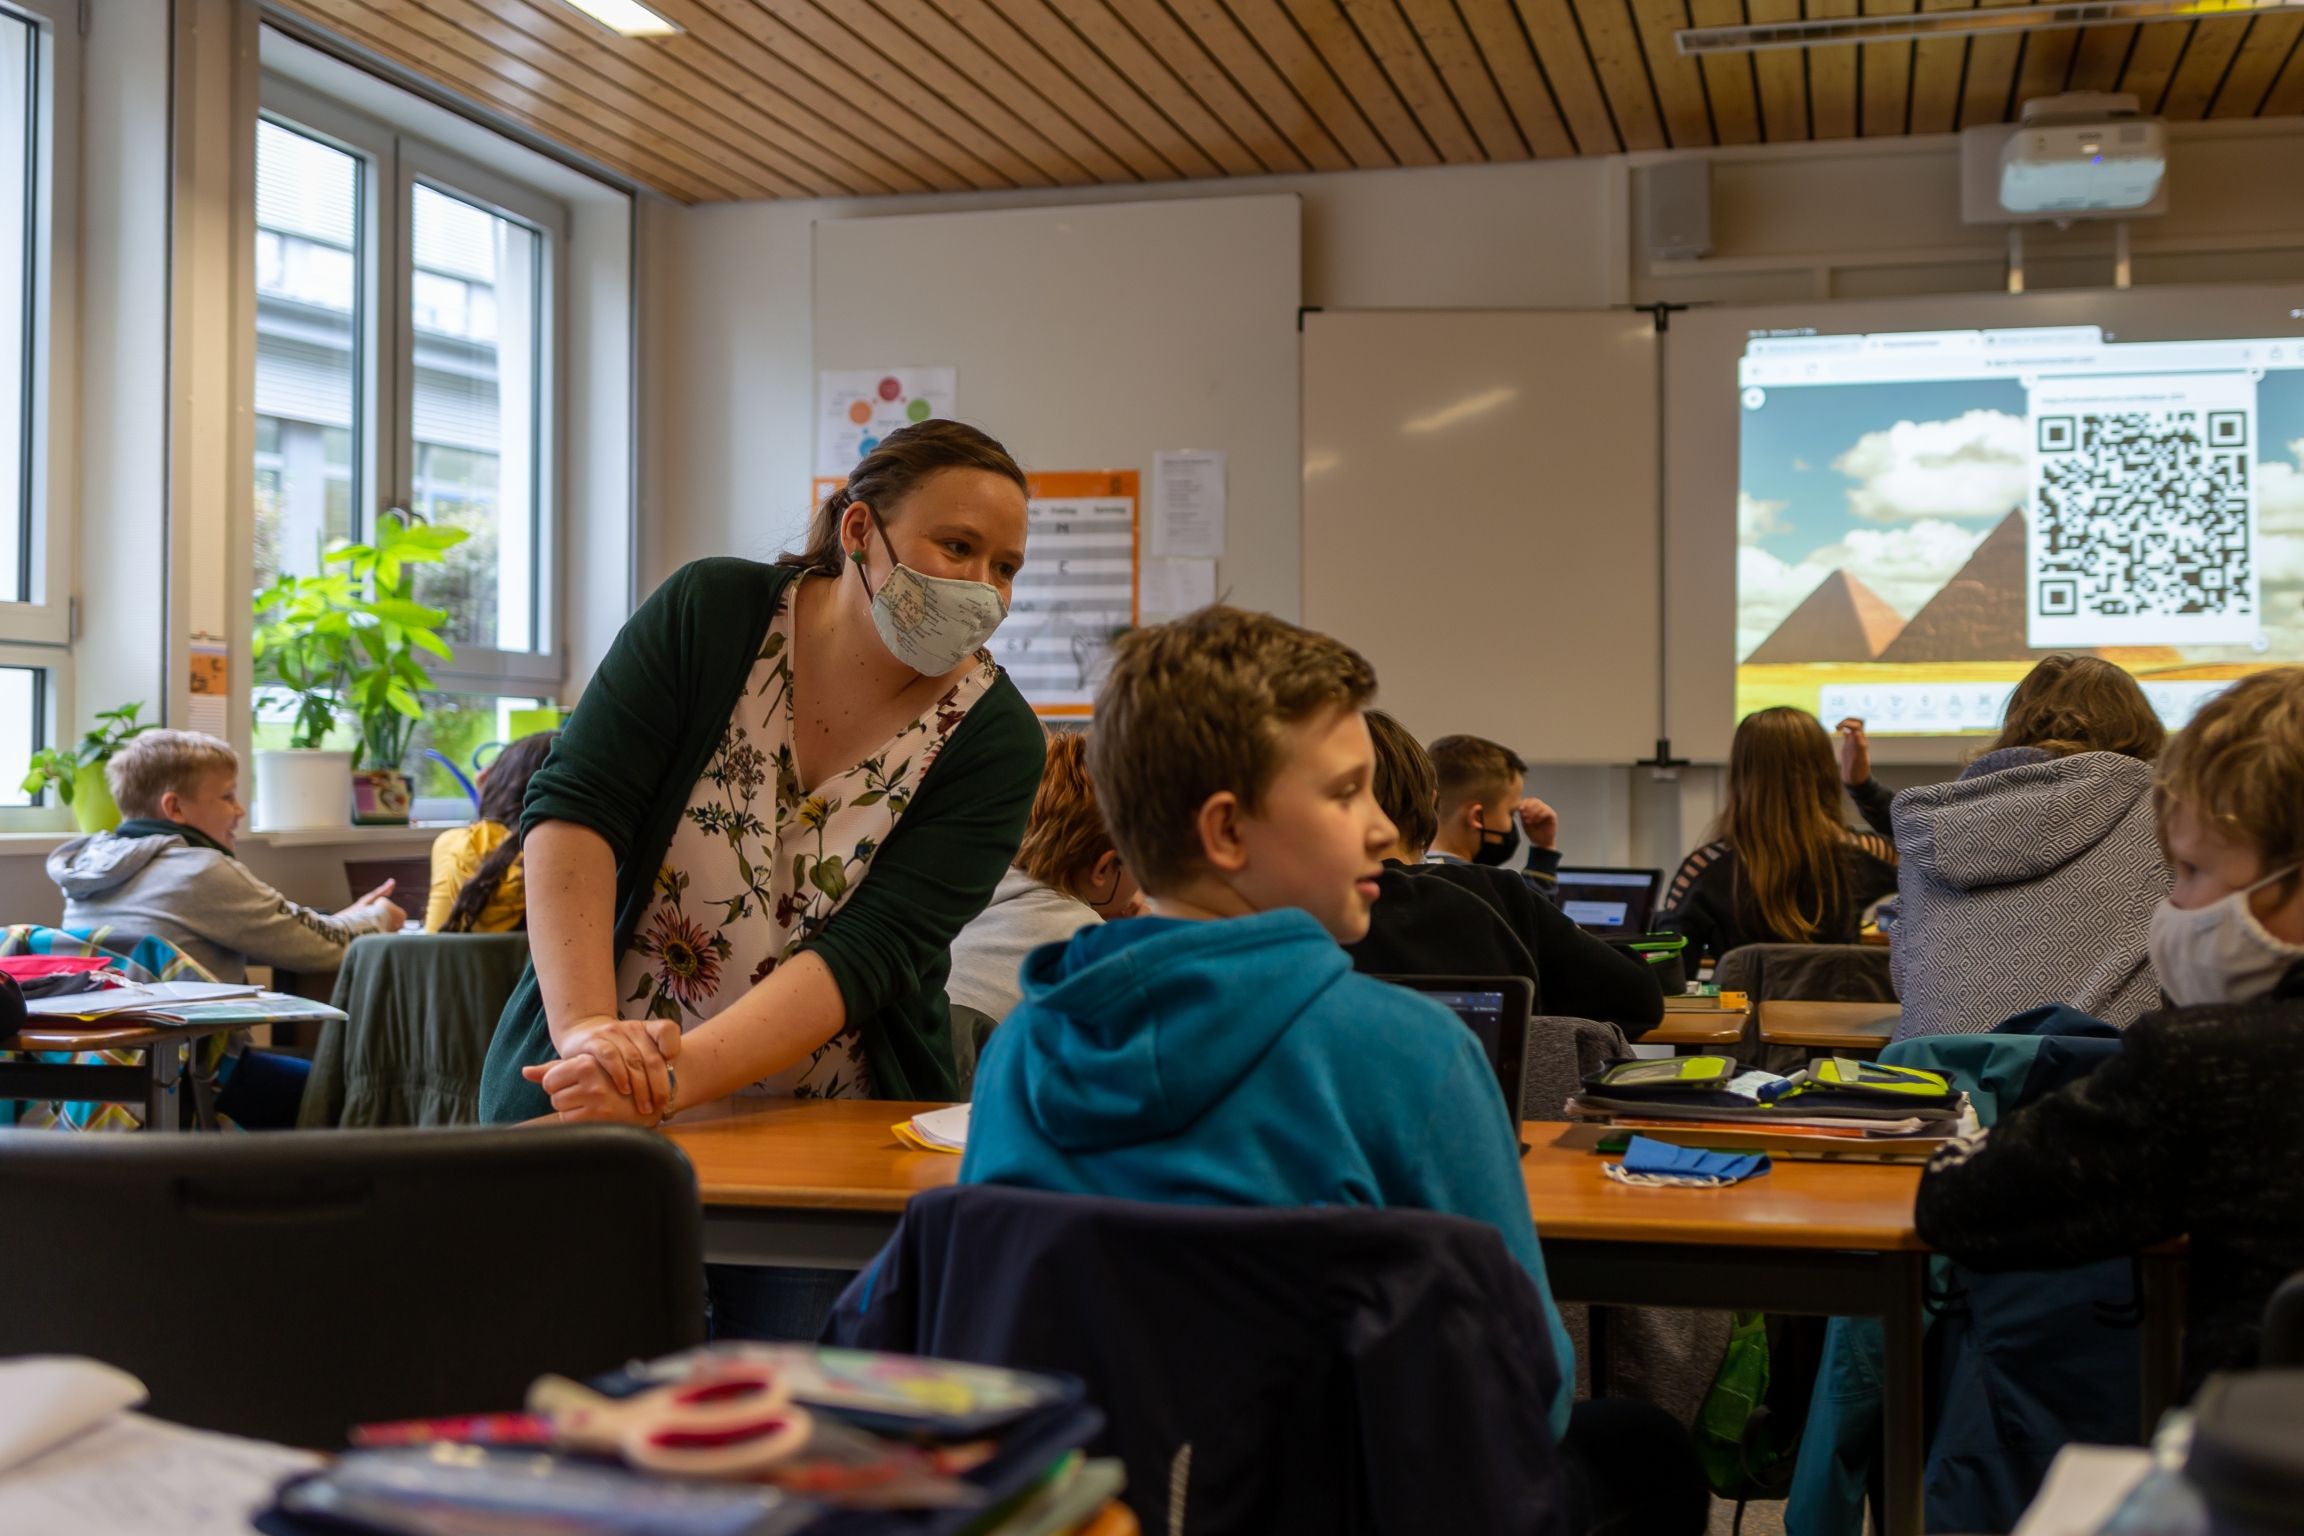 Teacher Inga Deppa works with students in an English class at Jacobishule in Kalletal, Germany. Masks were optional for students when they were seated at their desks, but the regional health authority has since tightened mask rules for older students. Image by Ryan Delaney. Germany, 2020.
